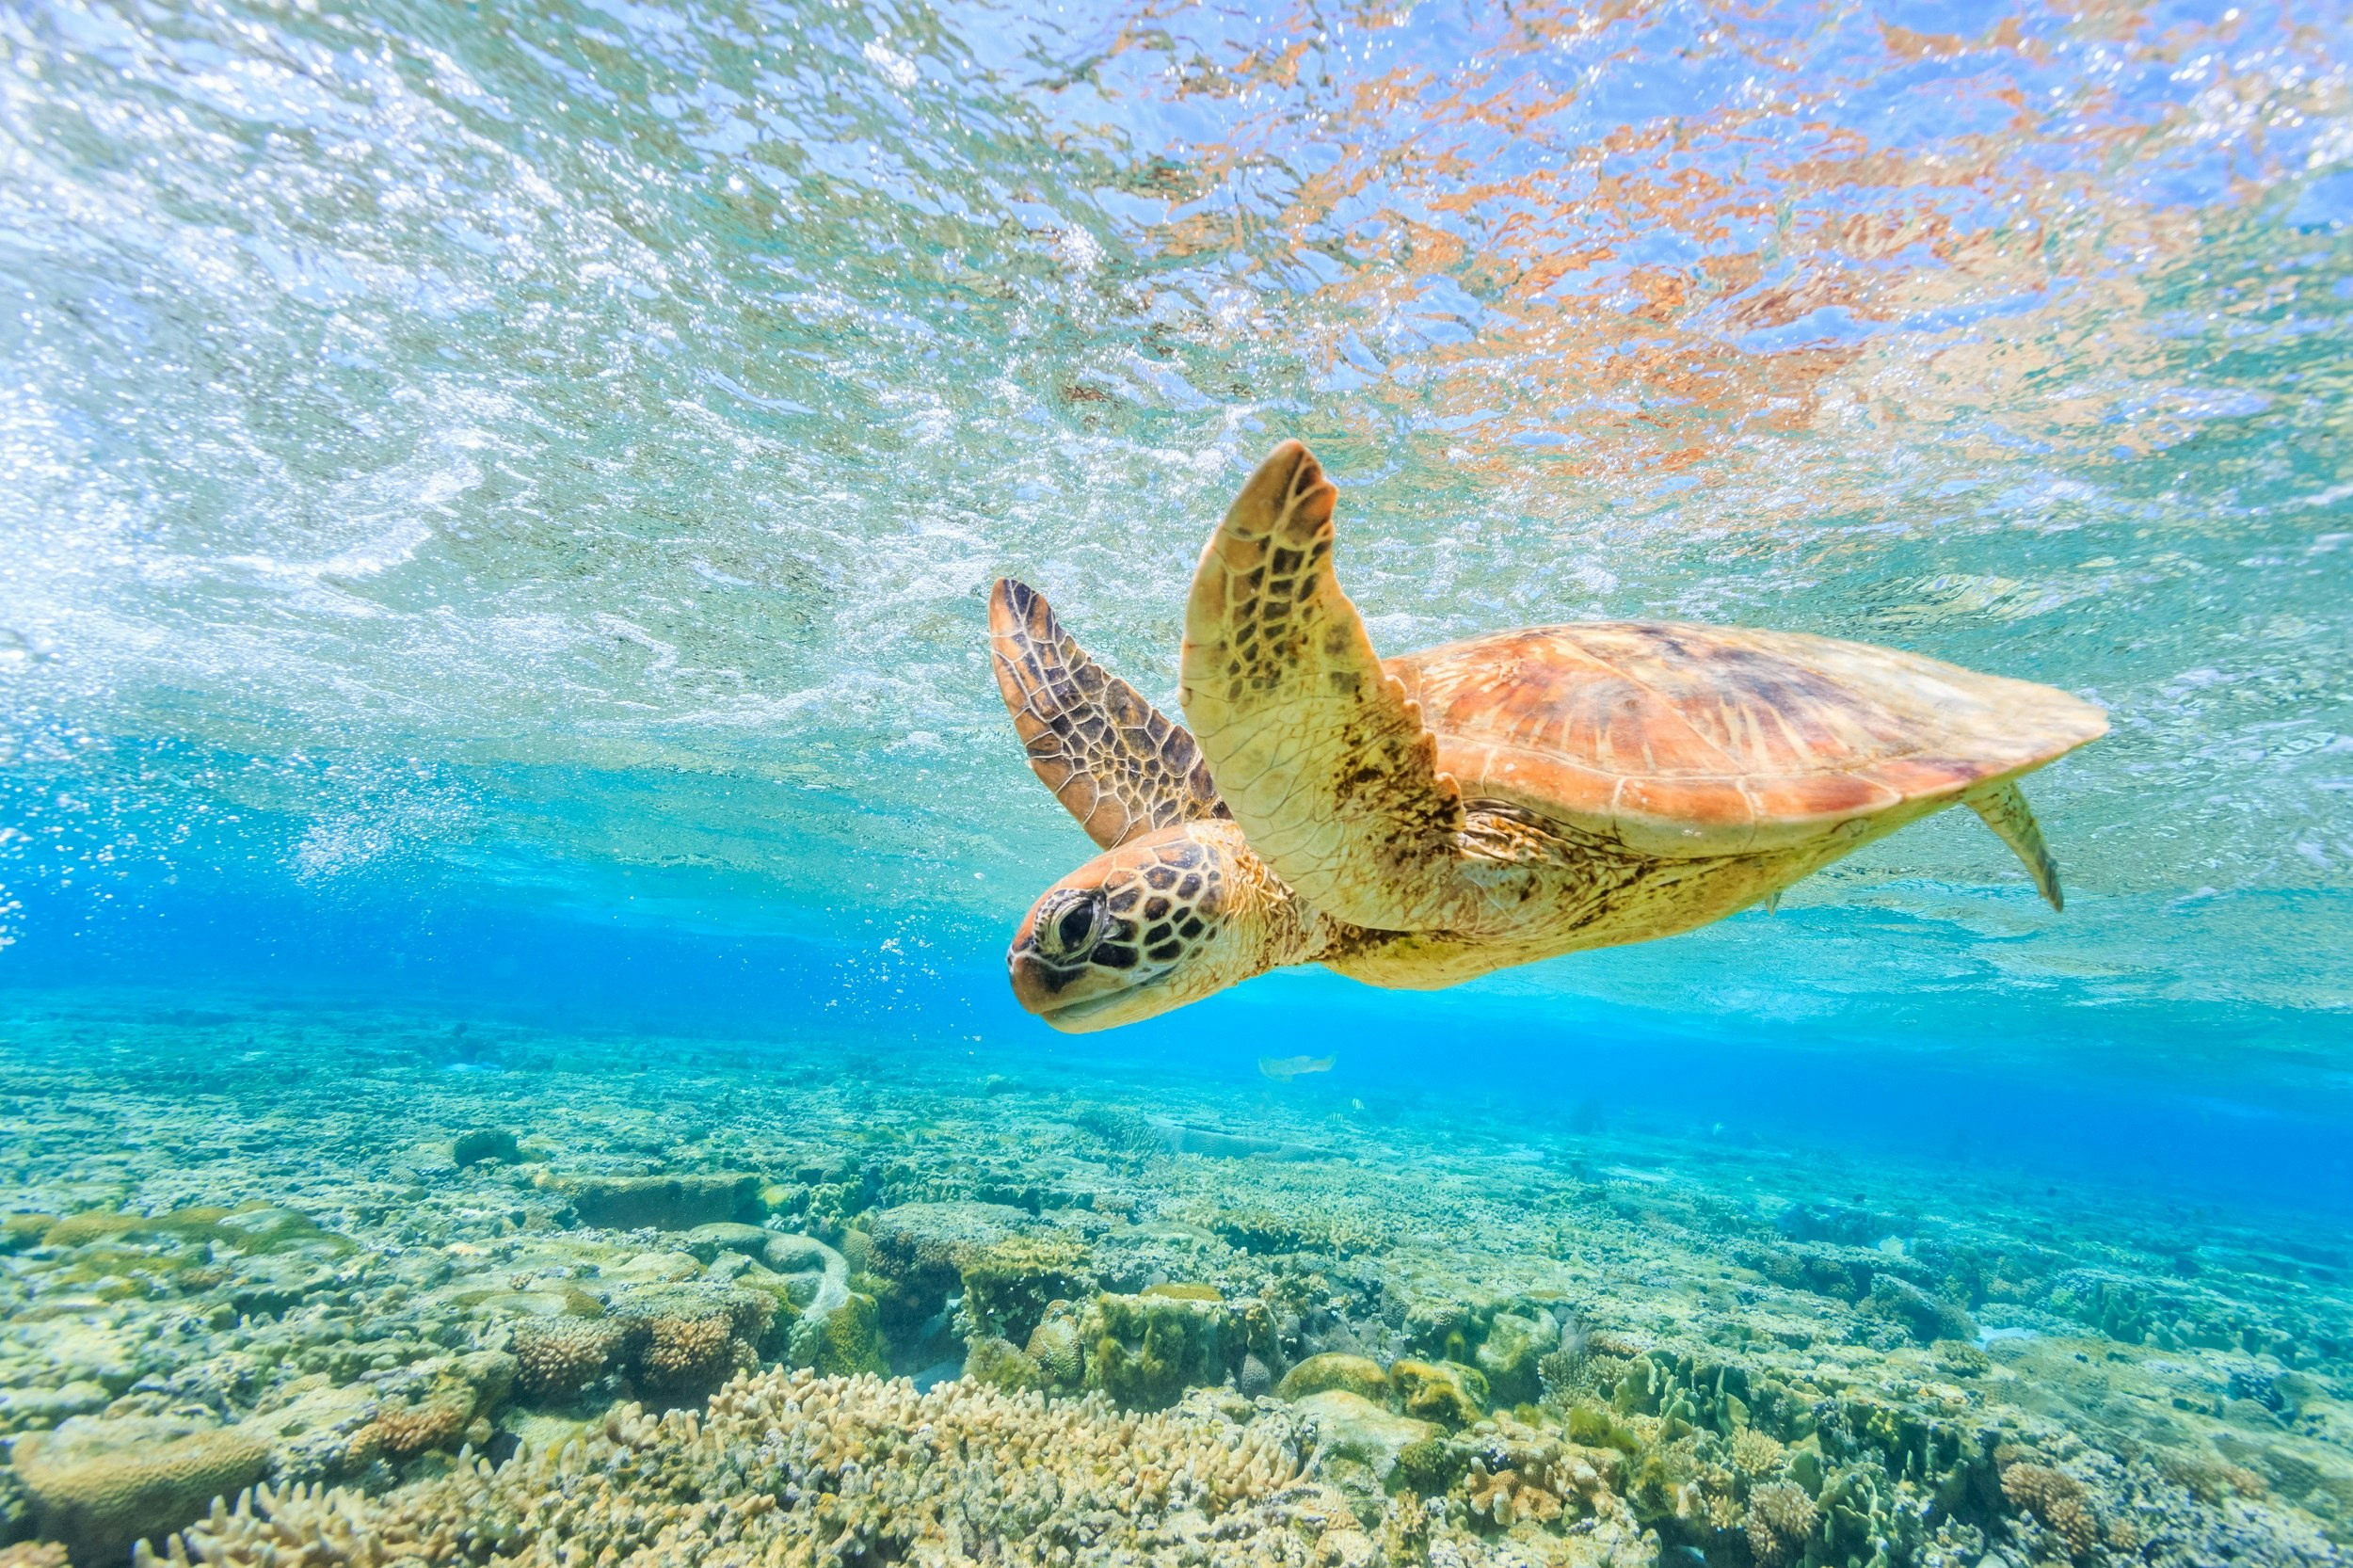 A turtle swims through shallow water with some coral below. The sea is clear, with blue and green colours dominating.